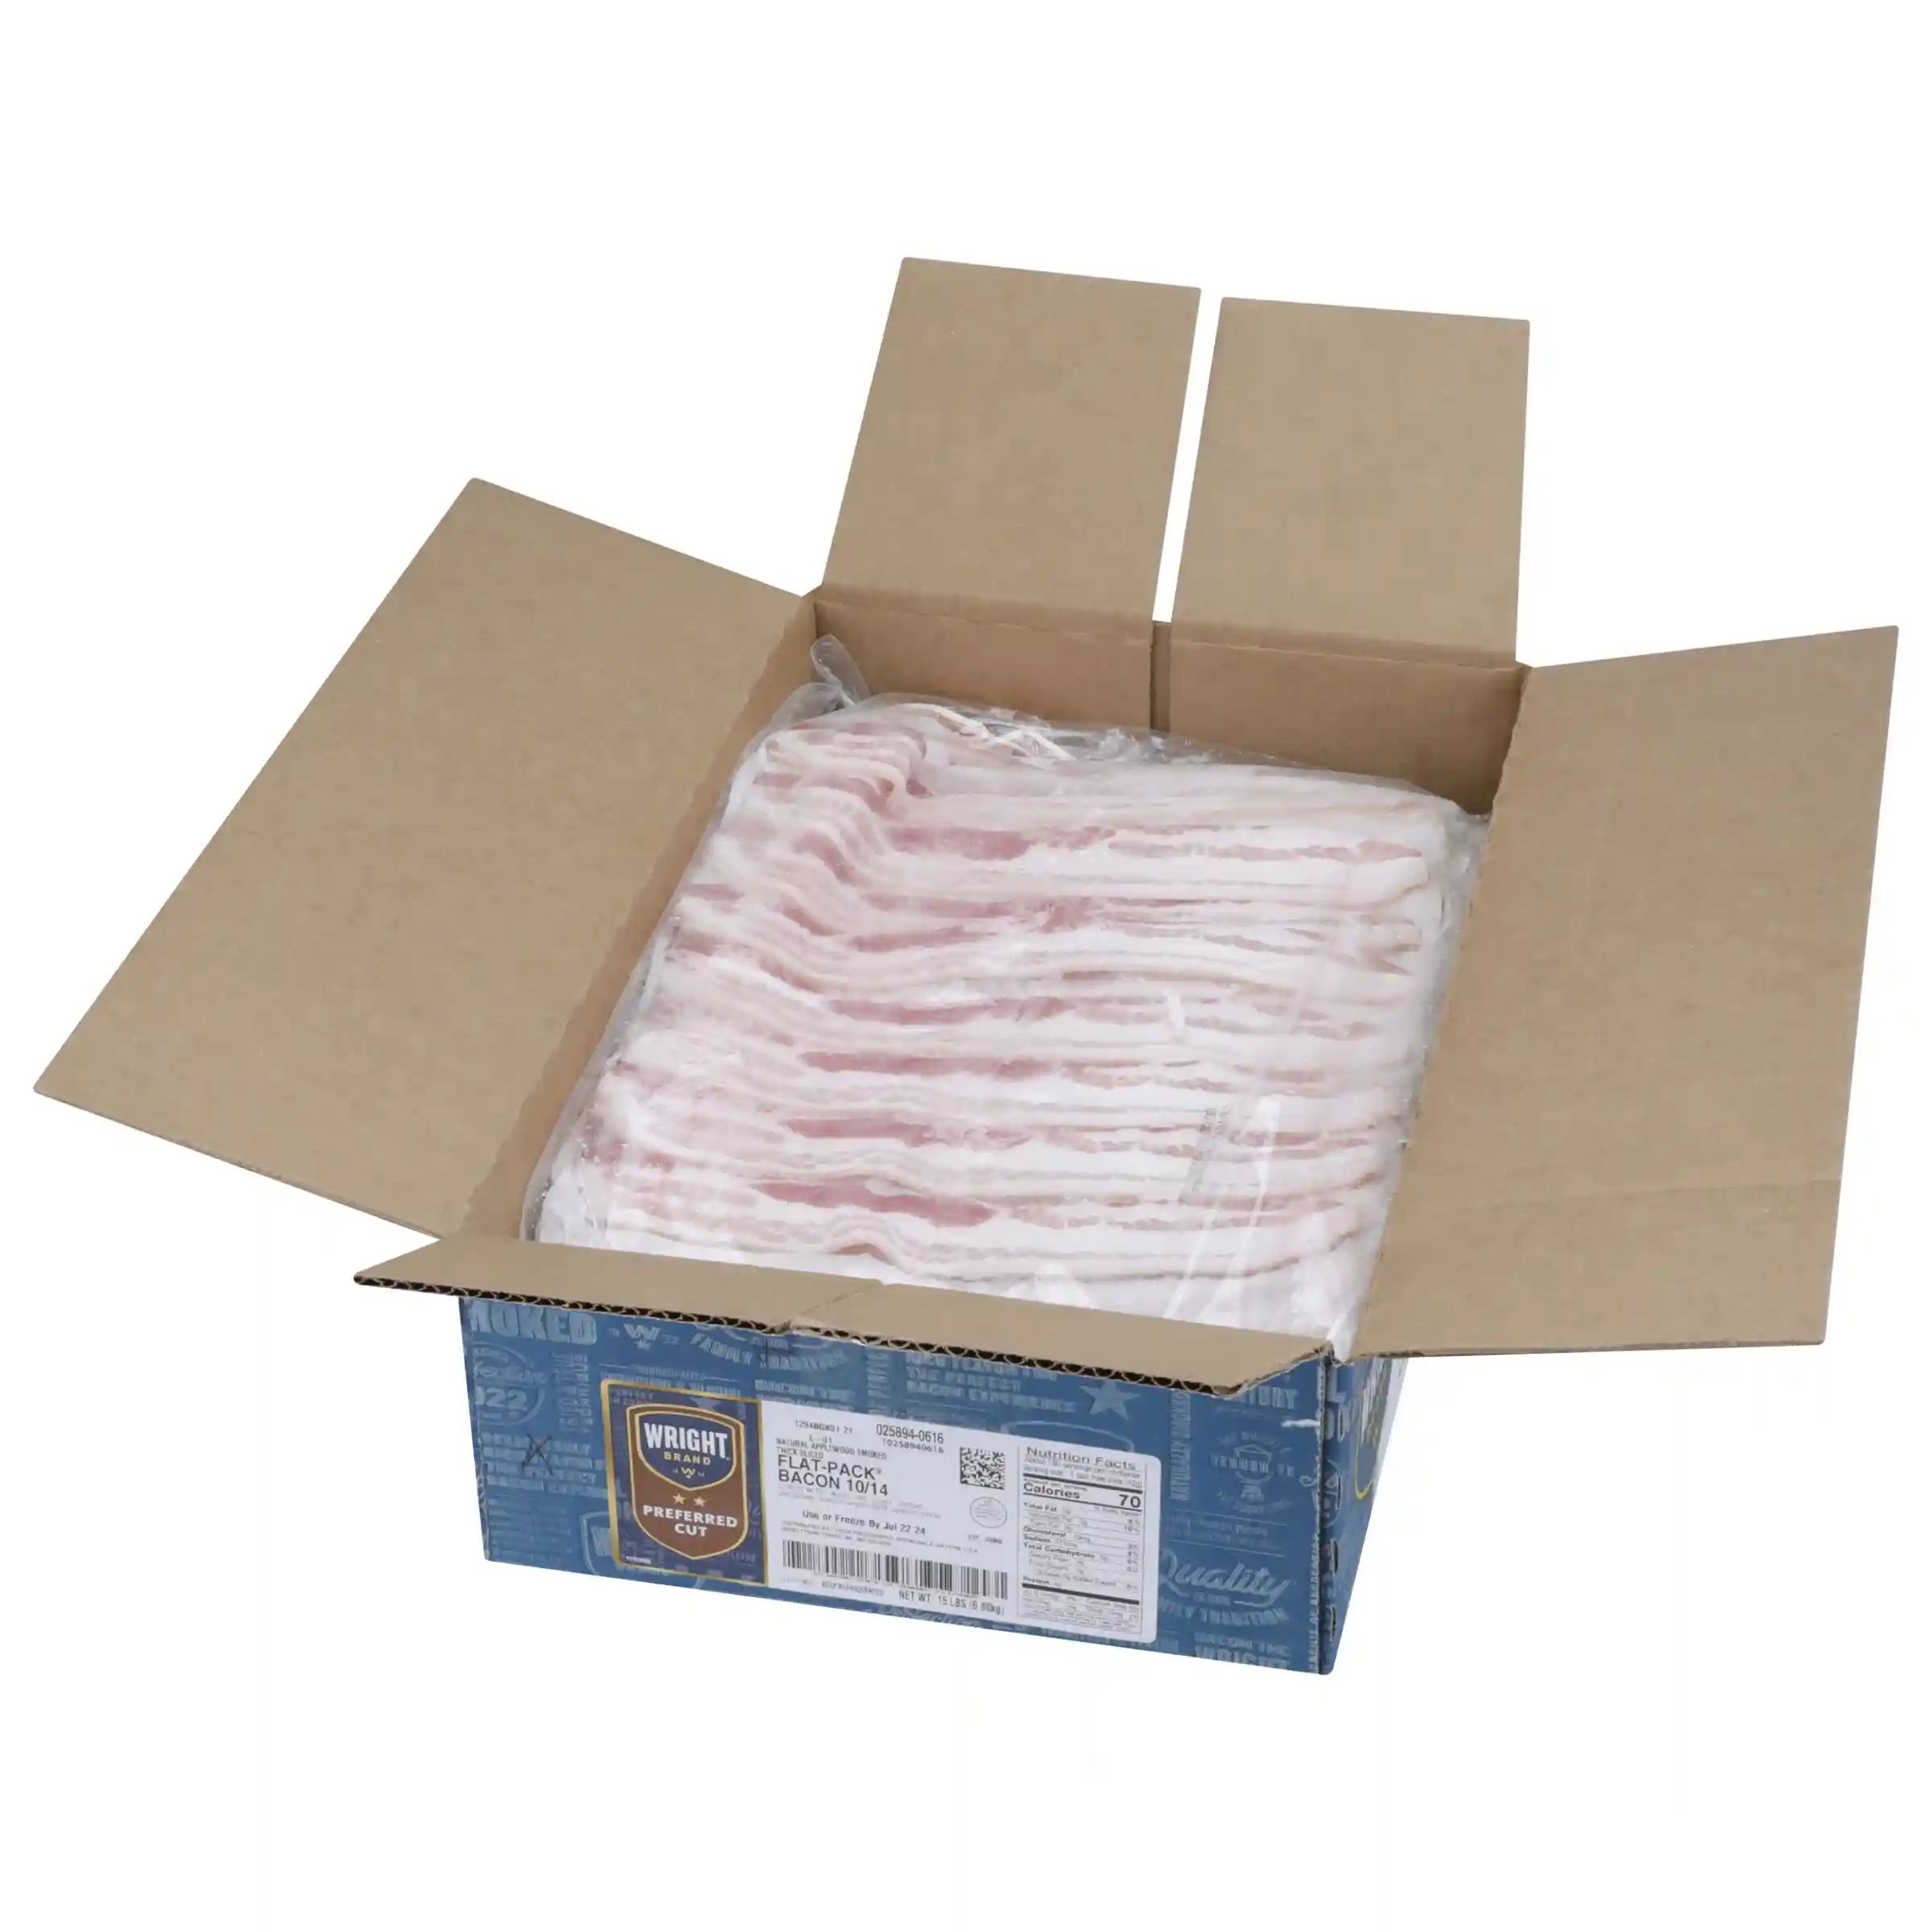 Wright® Brand Naturally Applewood Smoked Thick Sliced Bacon, Flat-Pack®, 15 Lbs, 10-14 Slices per Pound, Gas Flushed_image_31